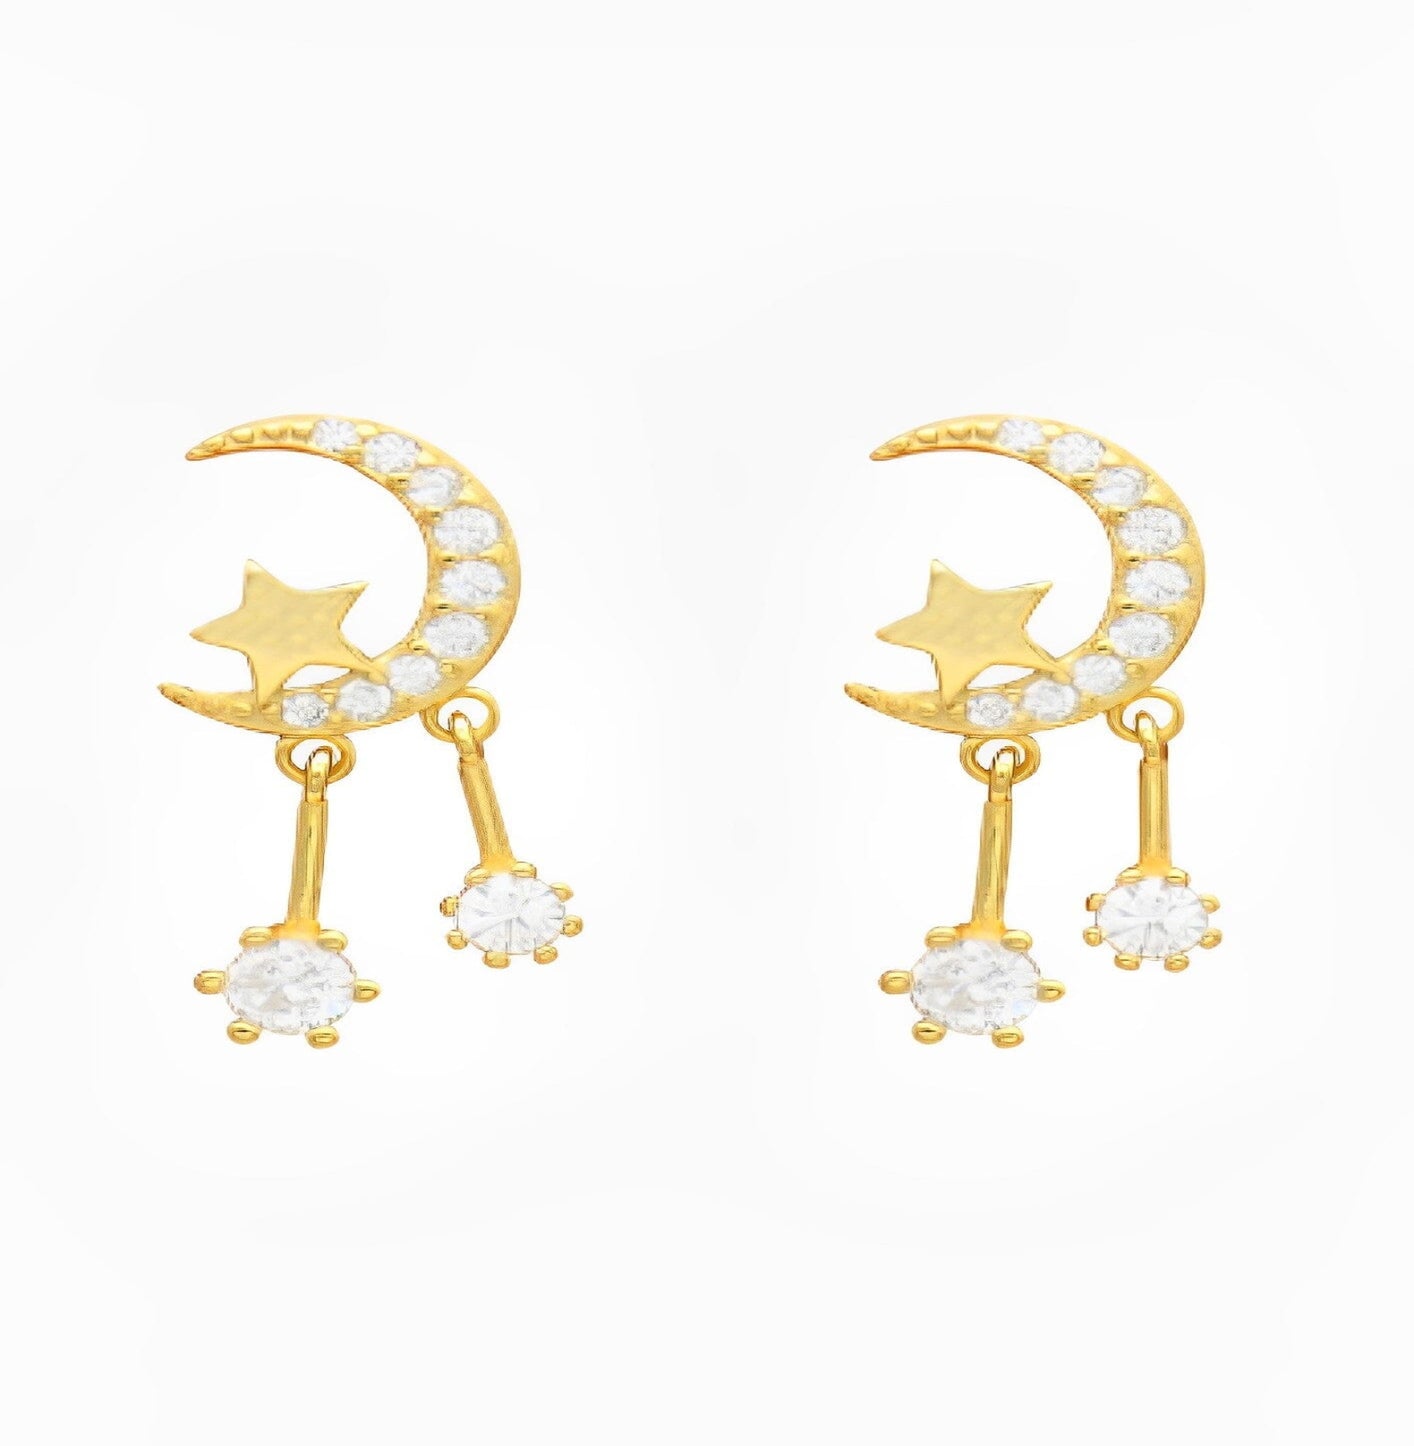 STAR SHORT EARRINGS earing Yubama Jewelry Online Store - The Elegant Designs of Gold and Silver ! 